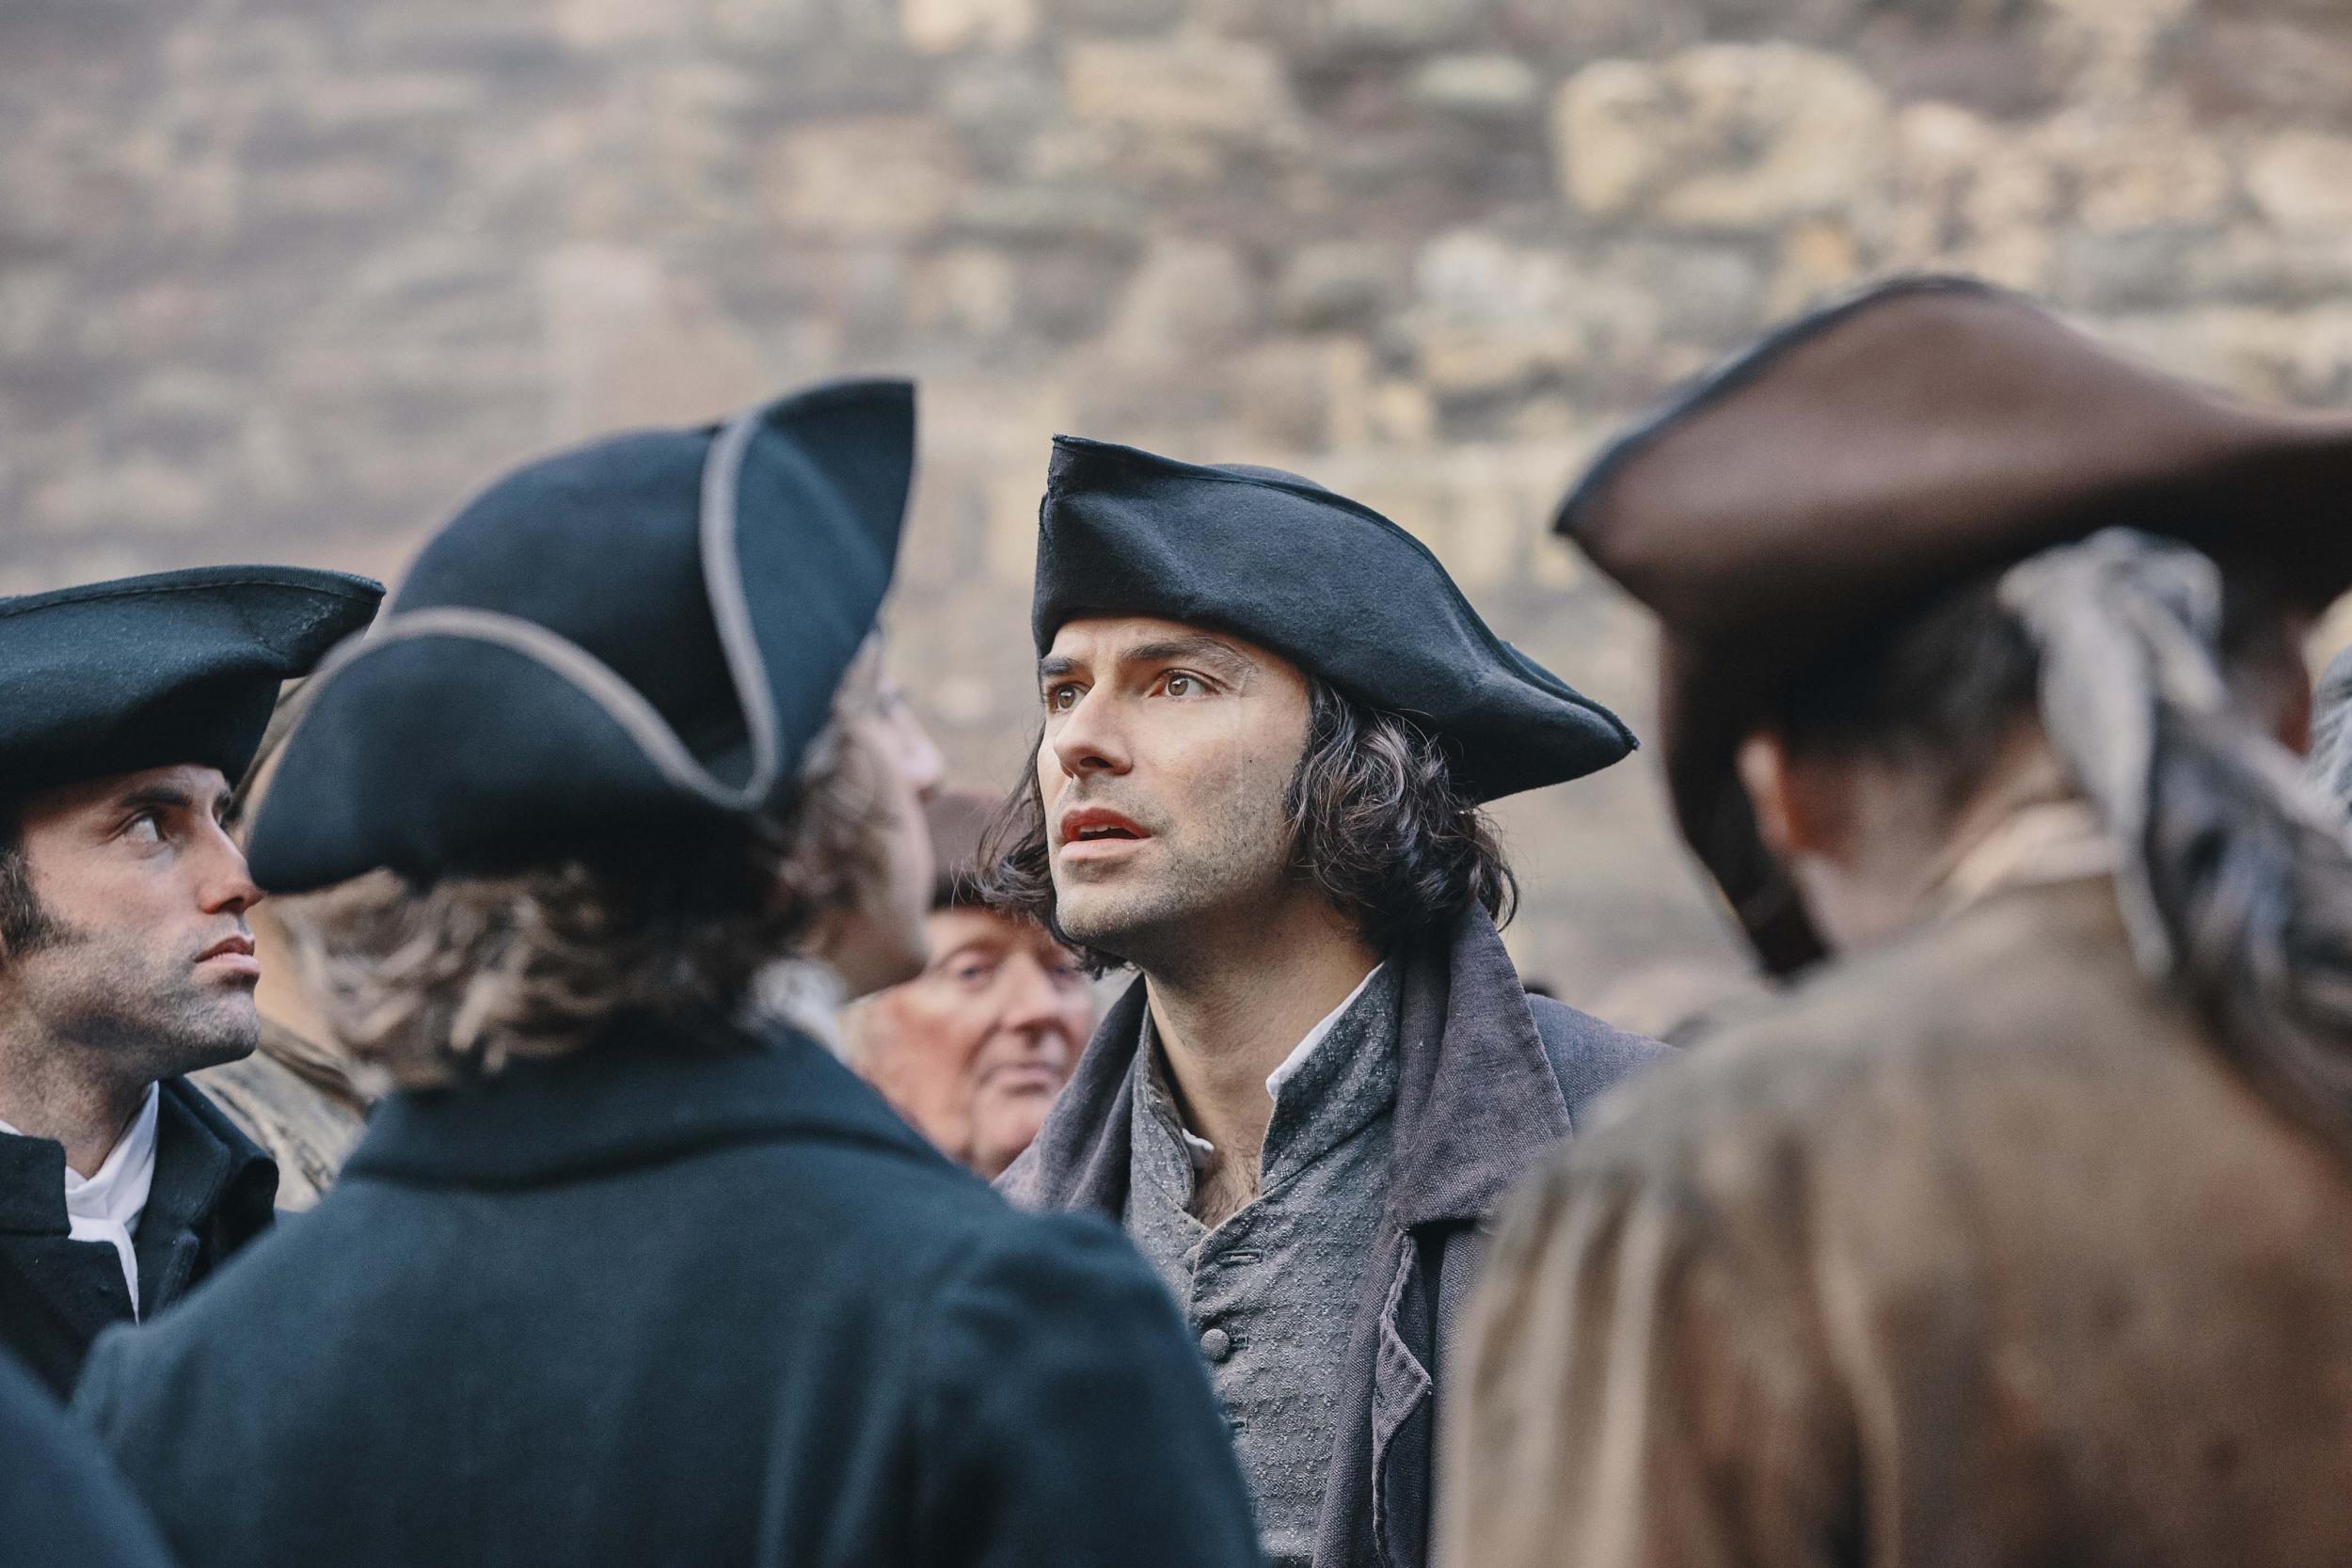 ‘Poldark’ continues to liven up Sunday nights